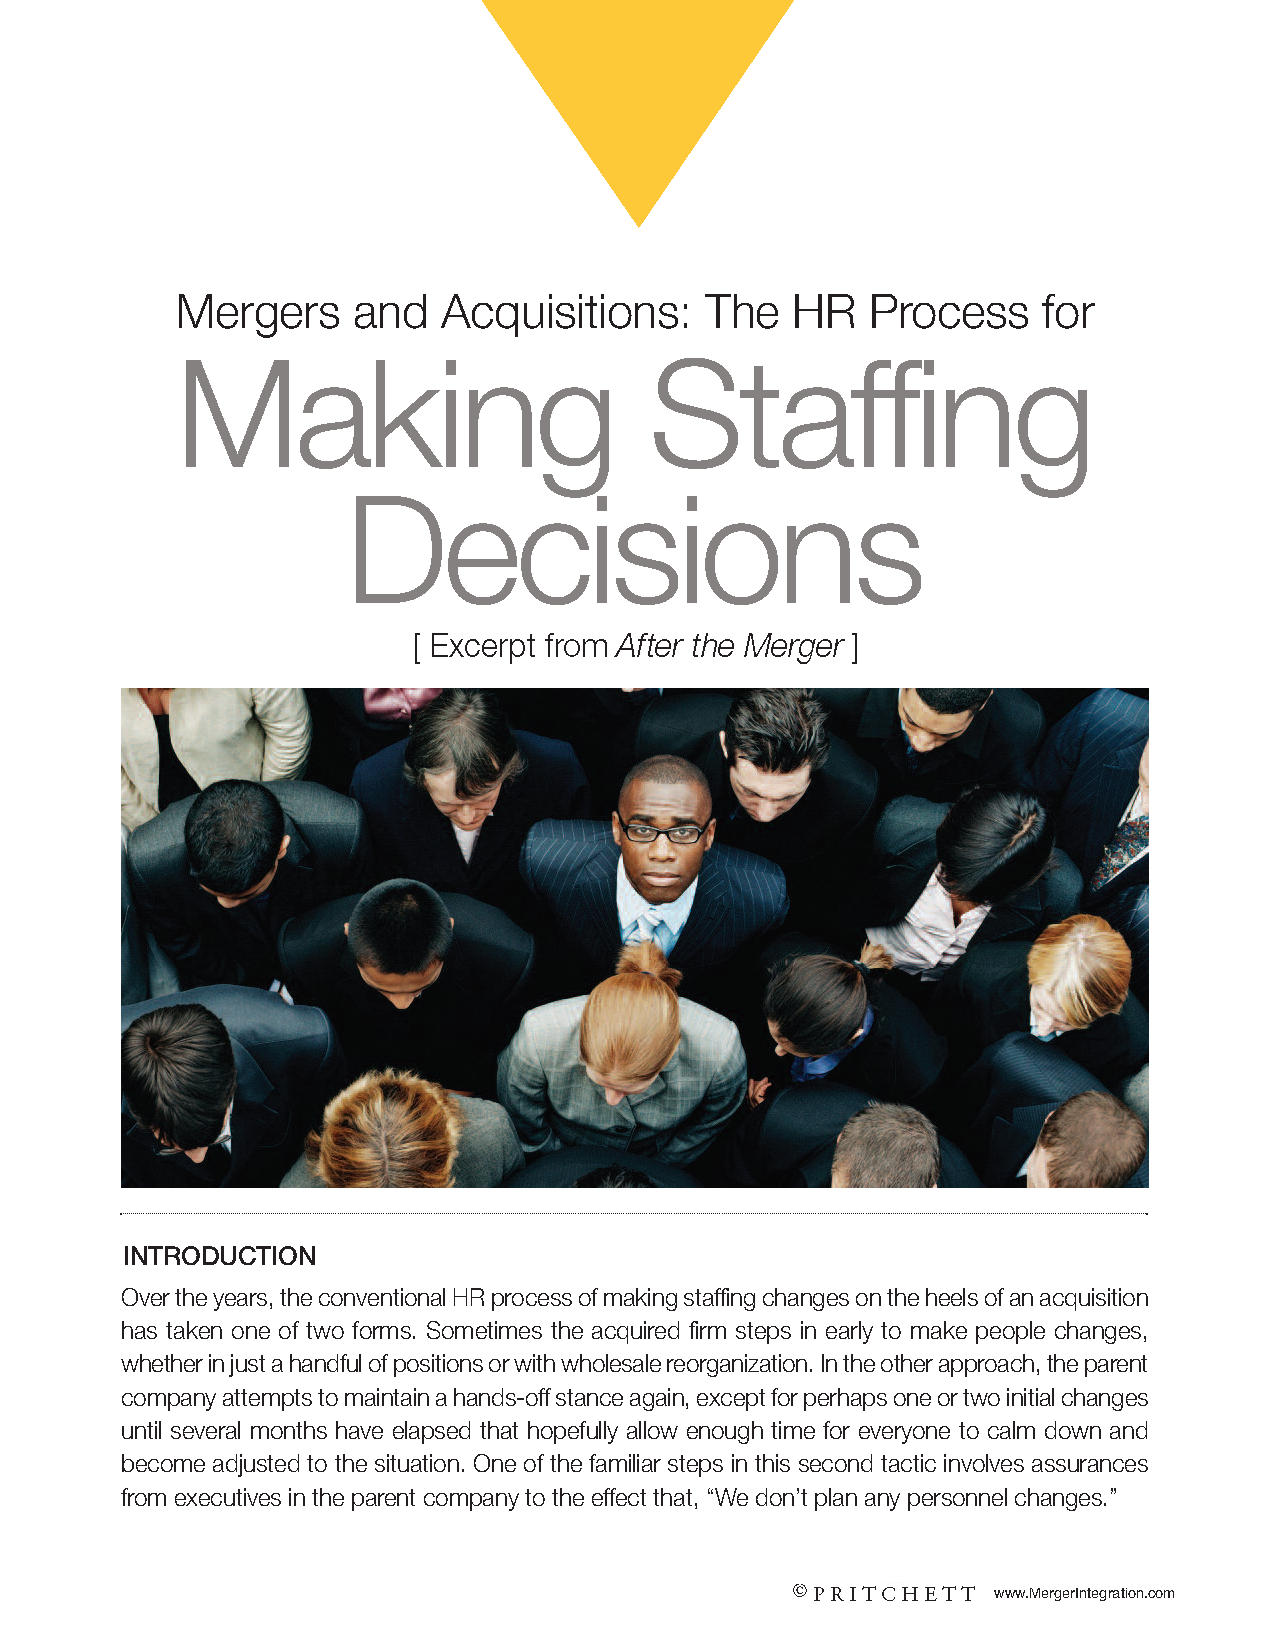 Making Staffing Decisions